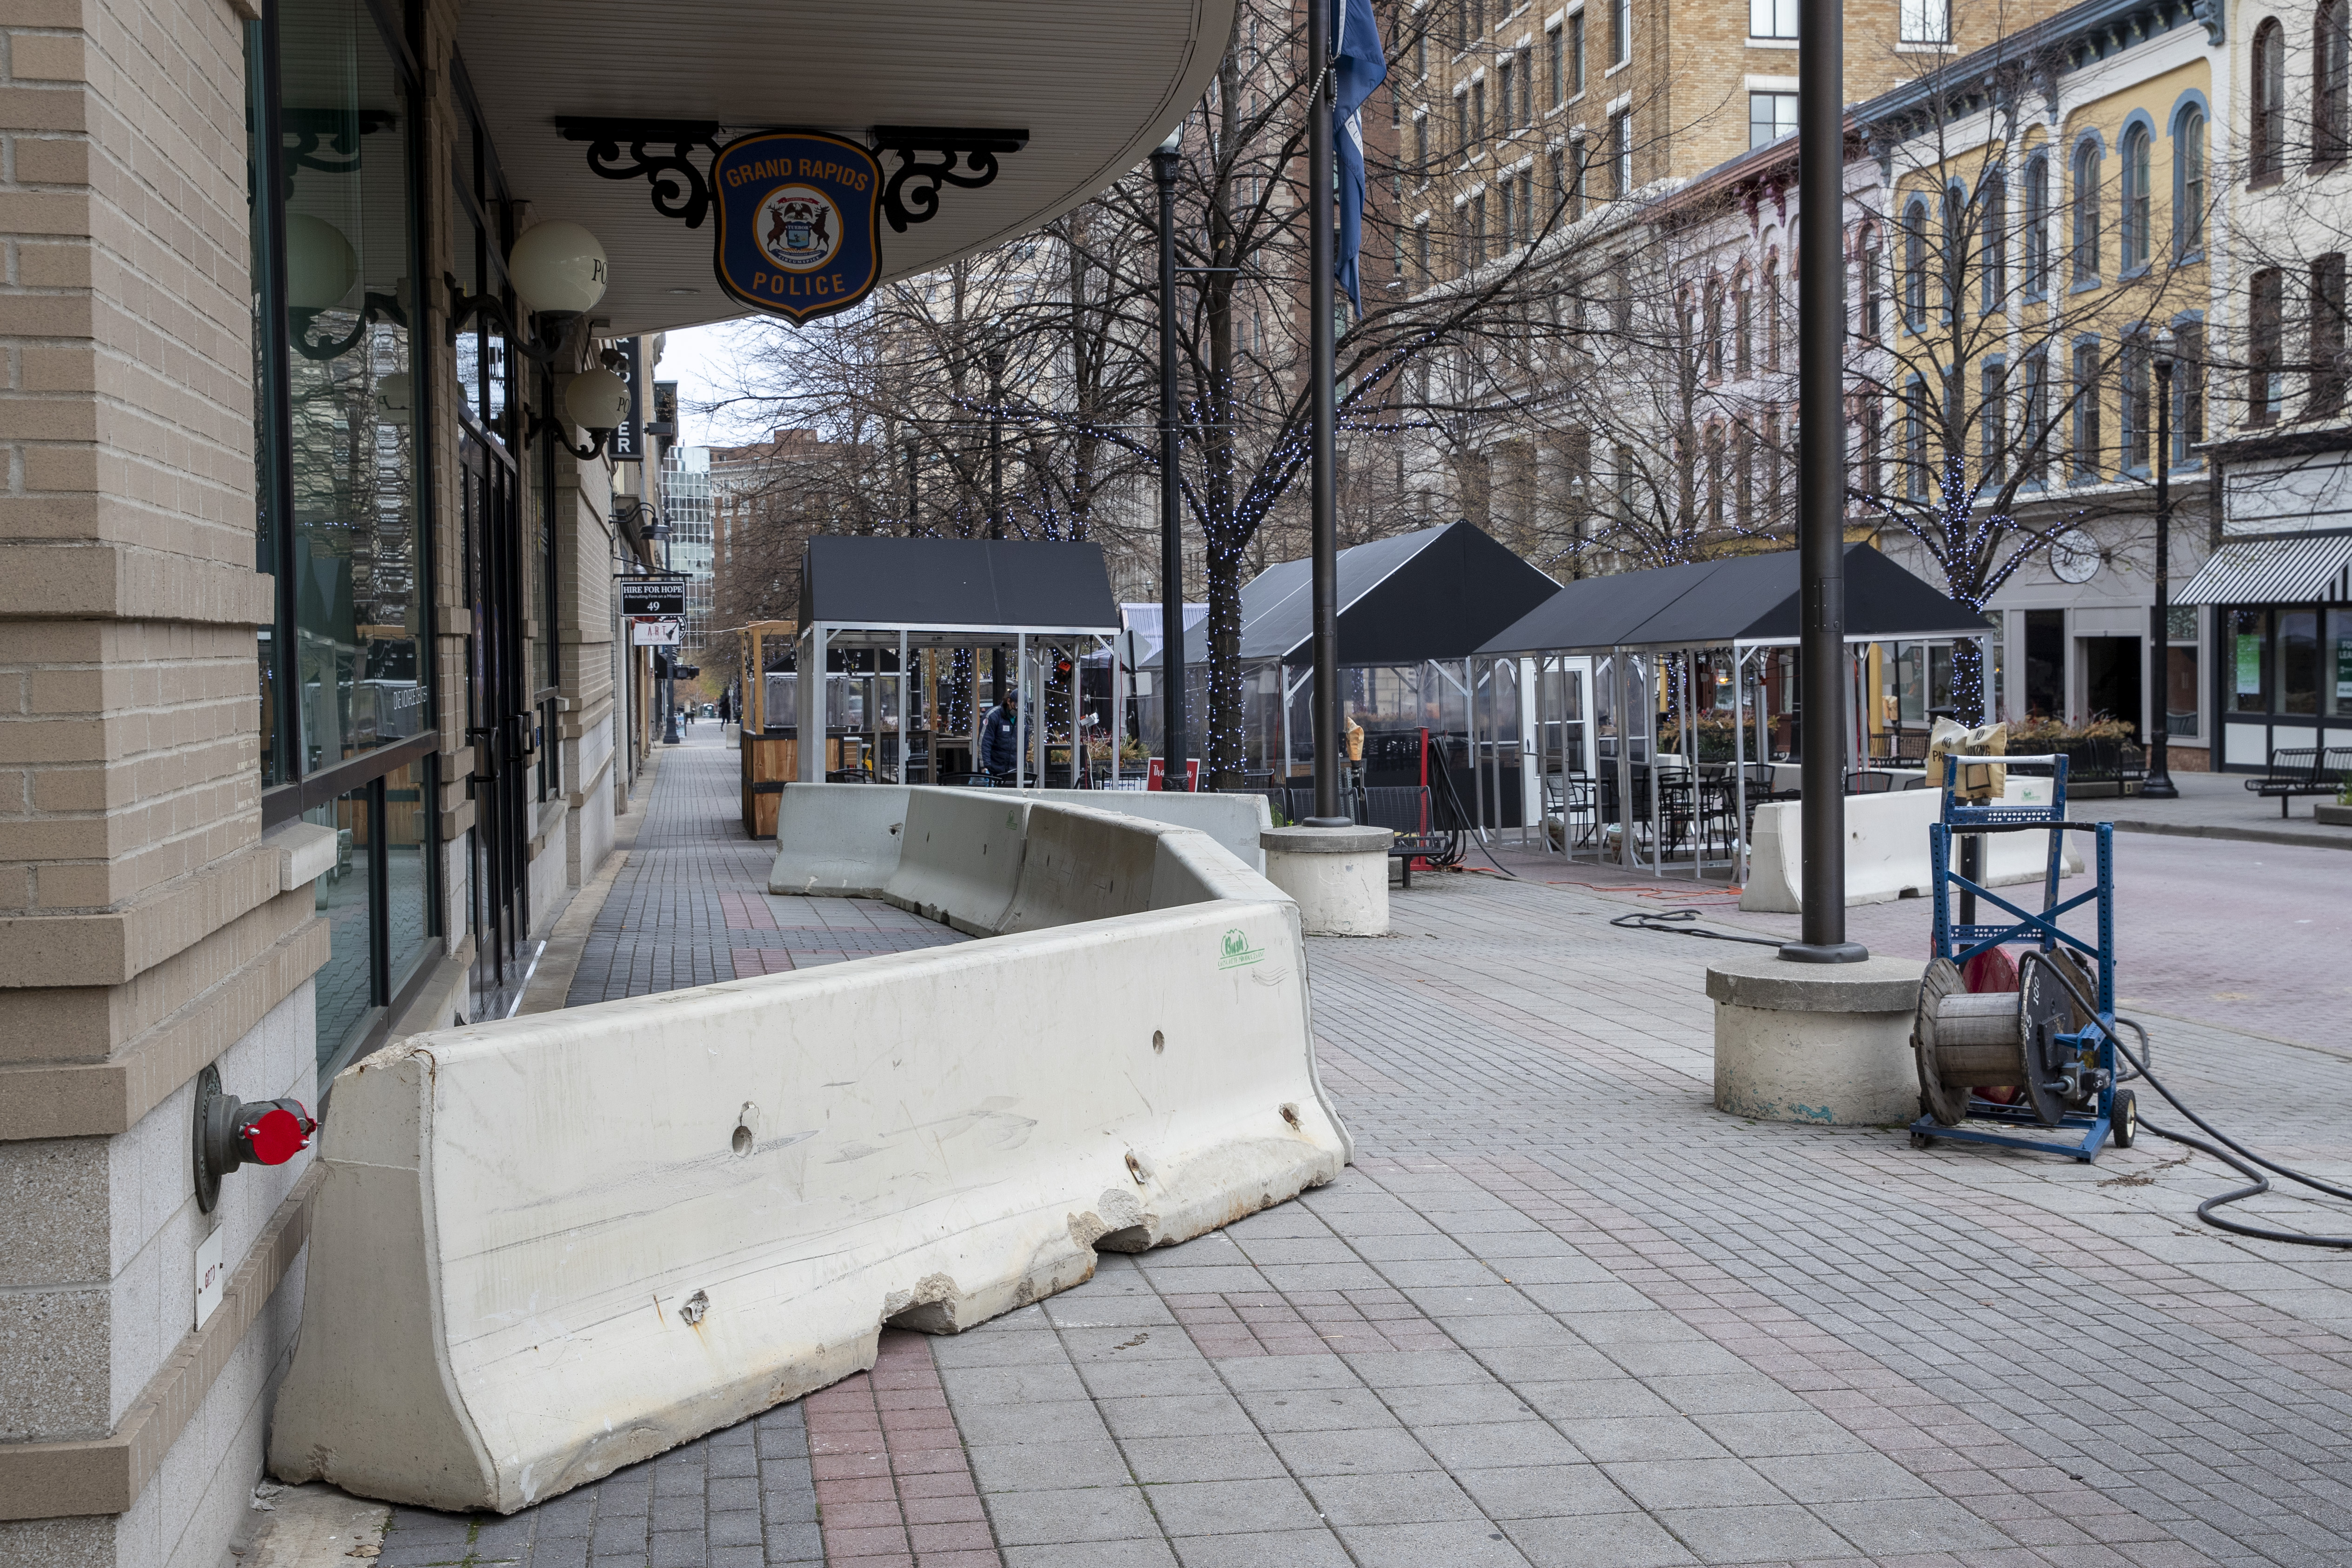 Barricades go up in downtown Grand Rapids, including around the Grand Rapids Police Department, on Tuesday, April 20, 2021, as a jury deliberates fate of Derek Chauvin in death of George Floyd. A riot on May 30, 2020, caused significant property damage in the aftermath of a peaceful protest following the death of Floyd in Minneapolis. (Cory Morse | MLive.com)